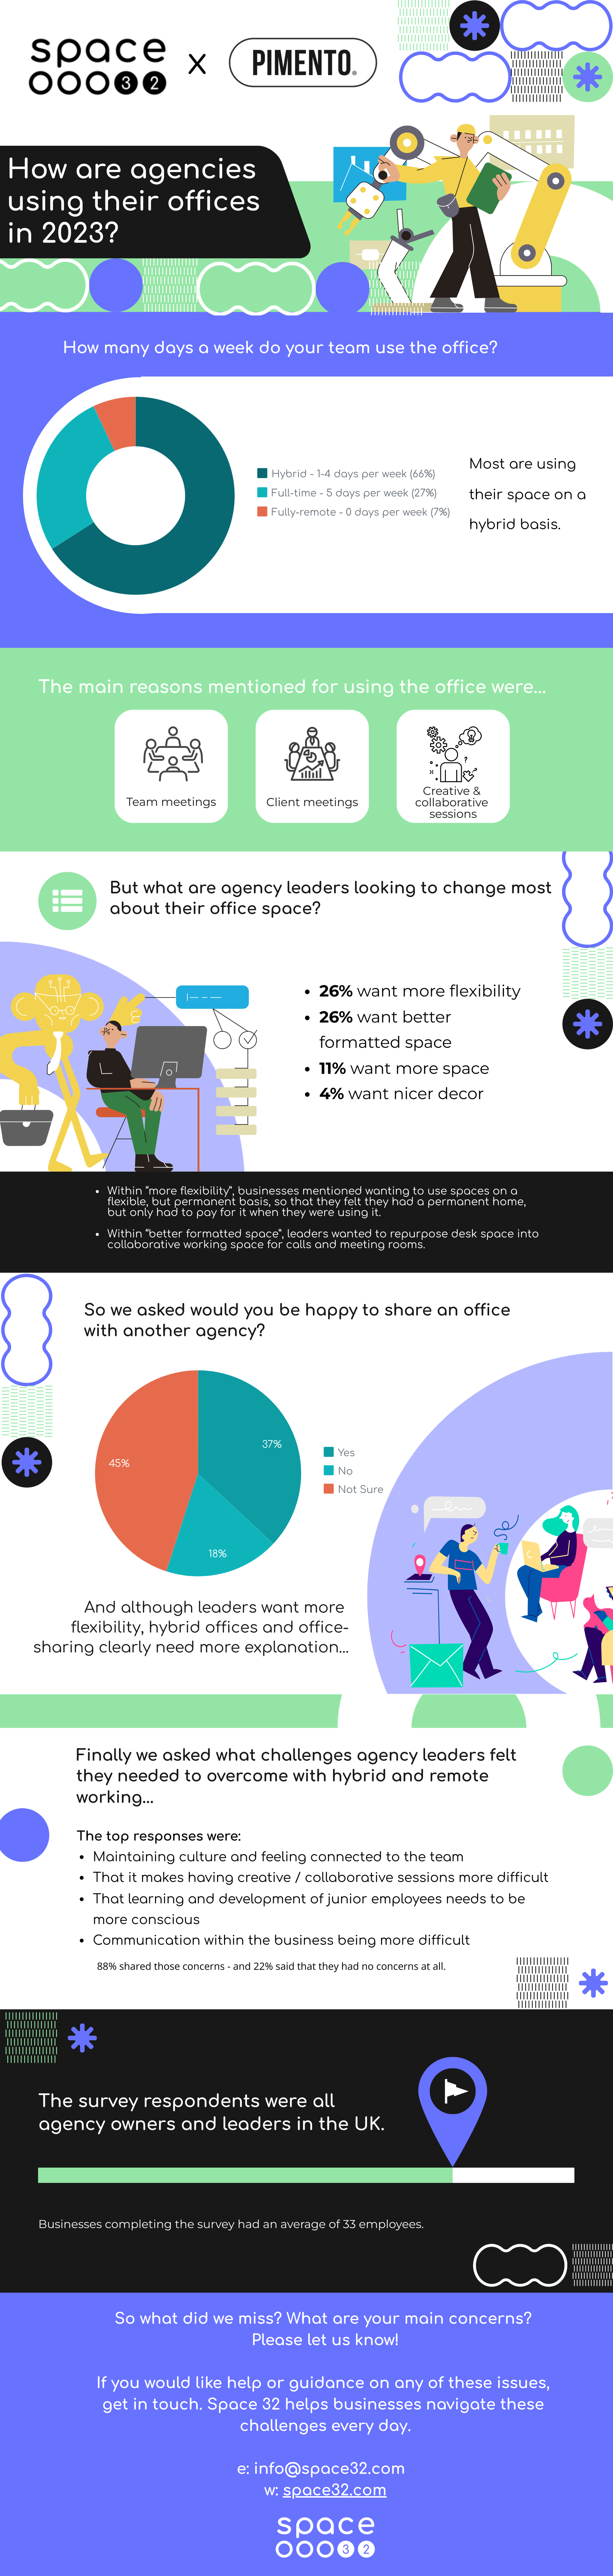 Space32 x Pimento - How are agencies using their office in 2023 infographic